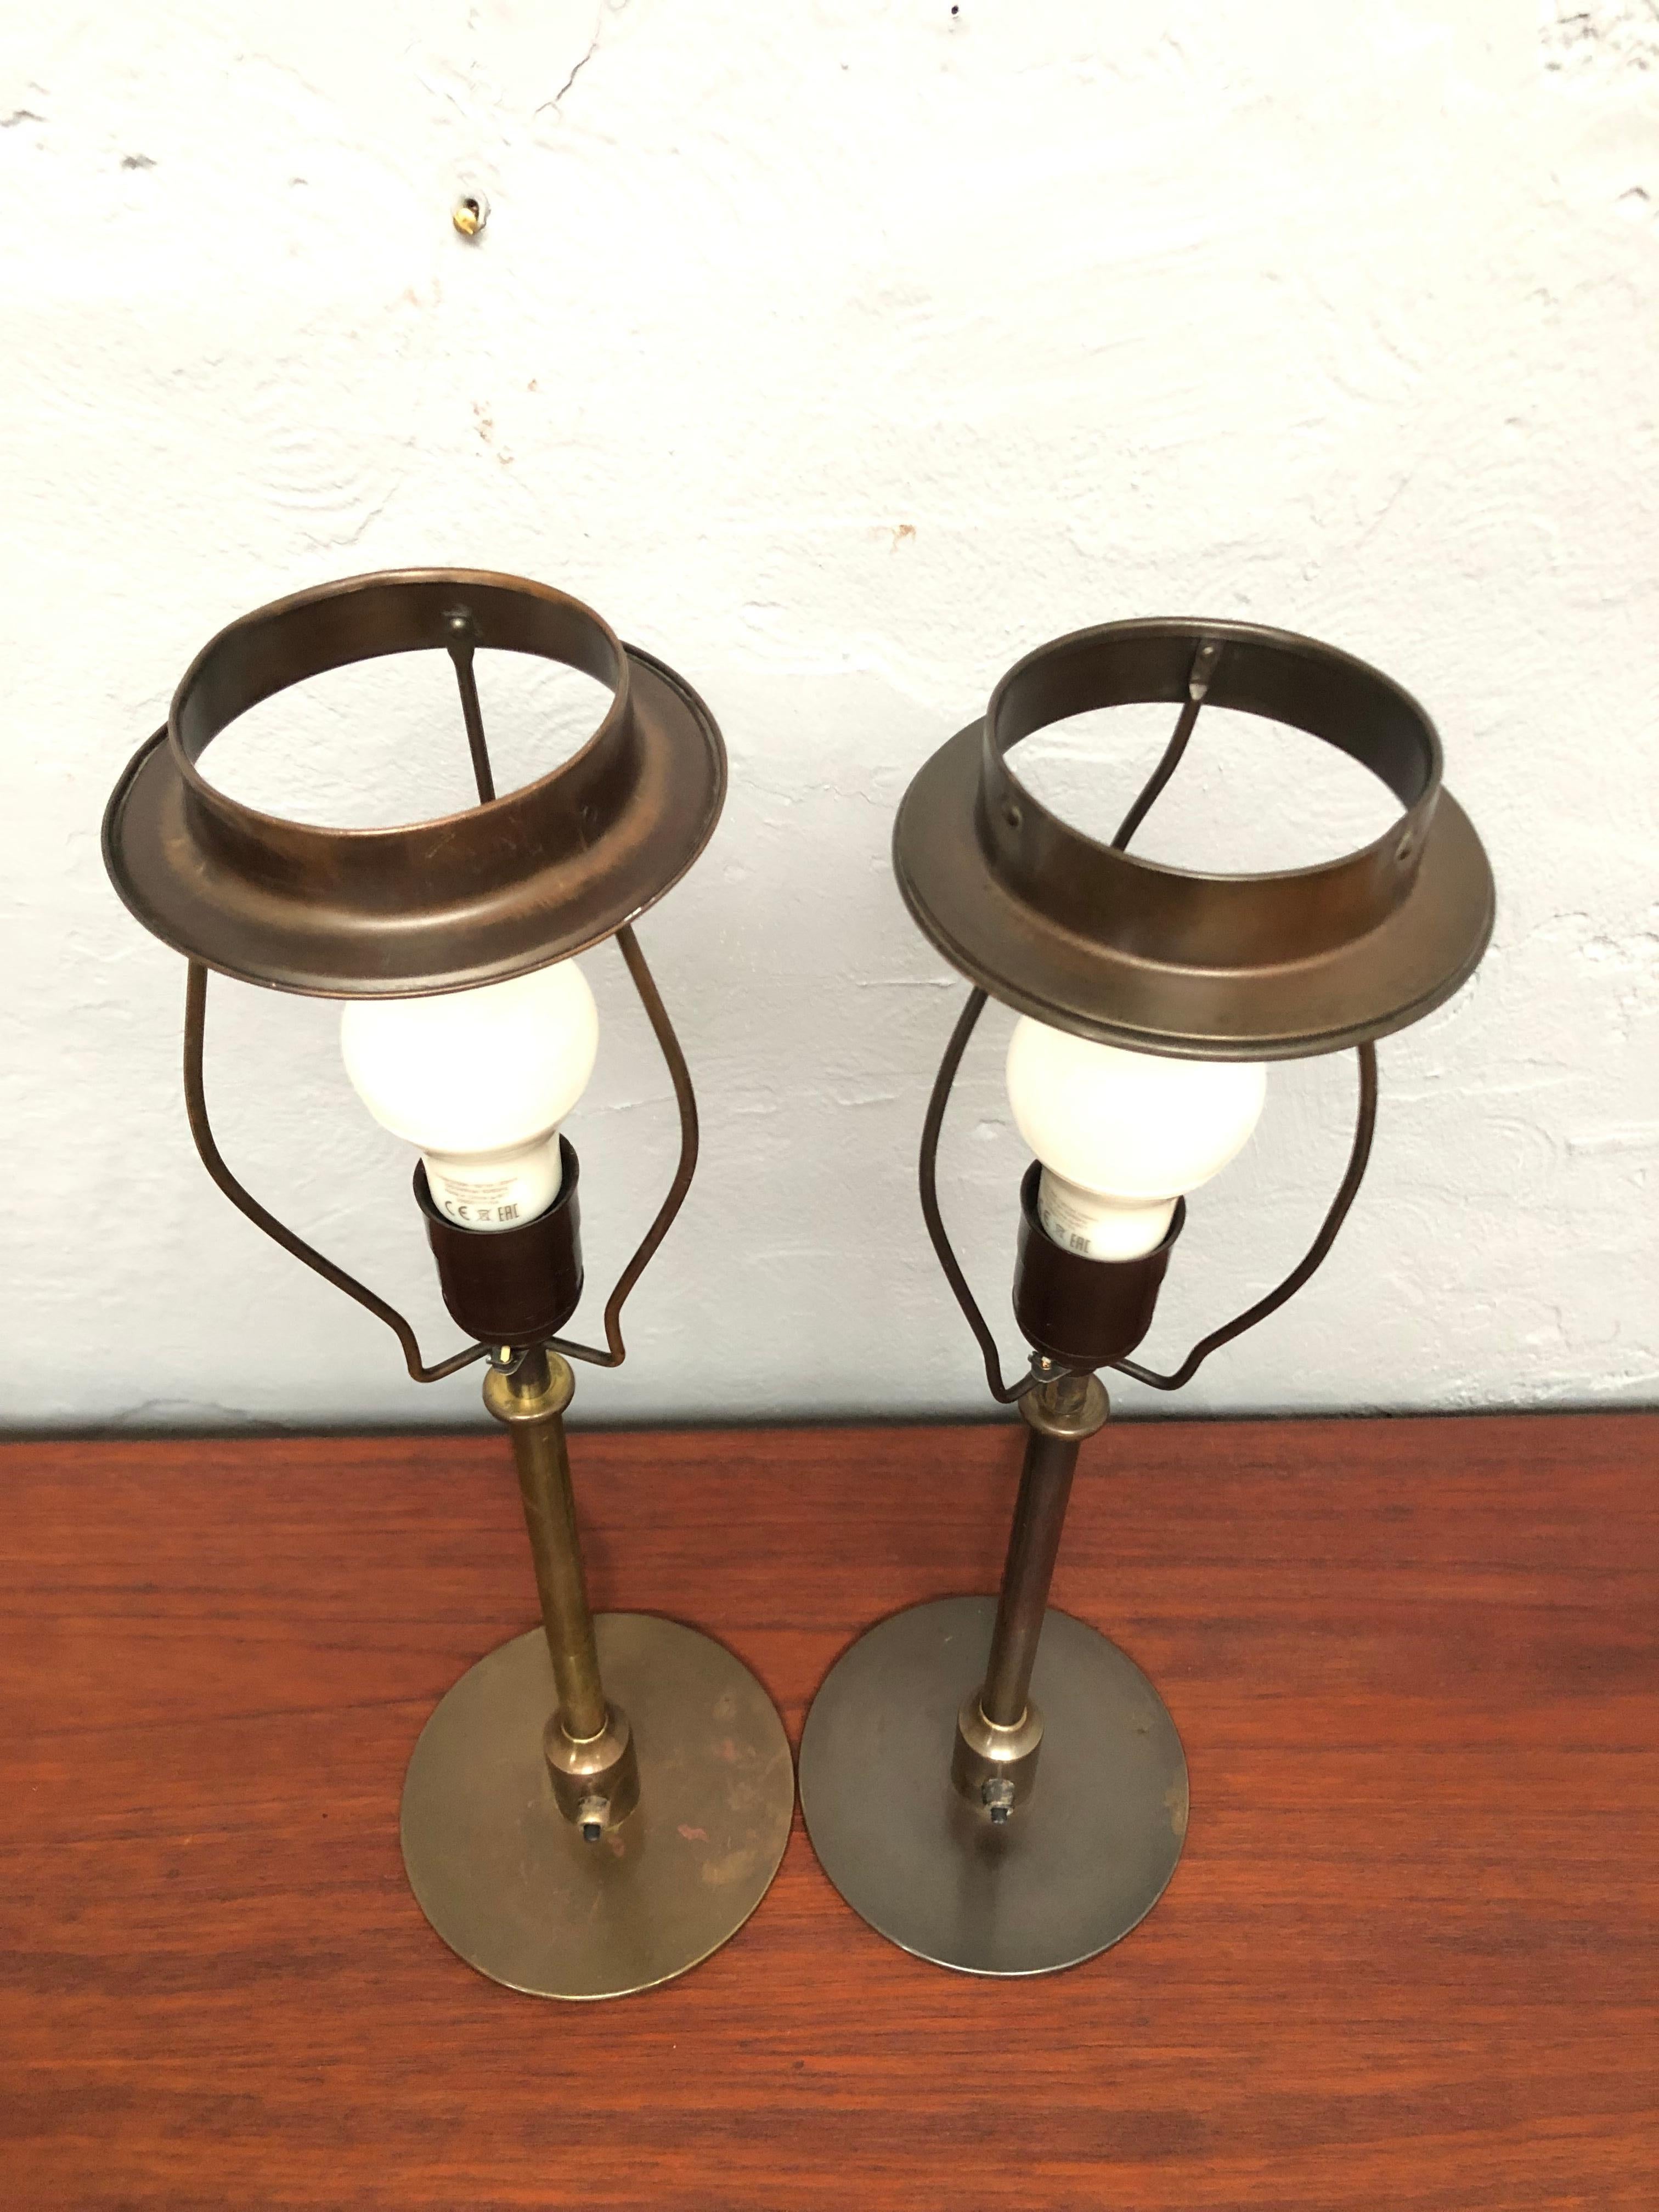 Hand-Crafted Pair of Vintage Brass Table Lamps by Fog & Mørup Lamp Makers from the 1940s For Sale